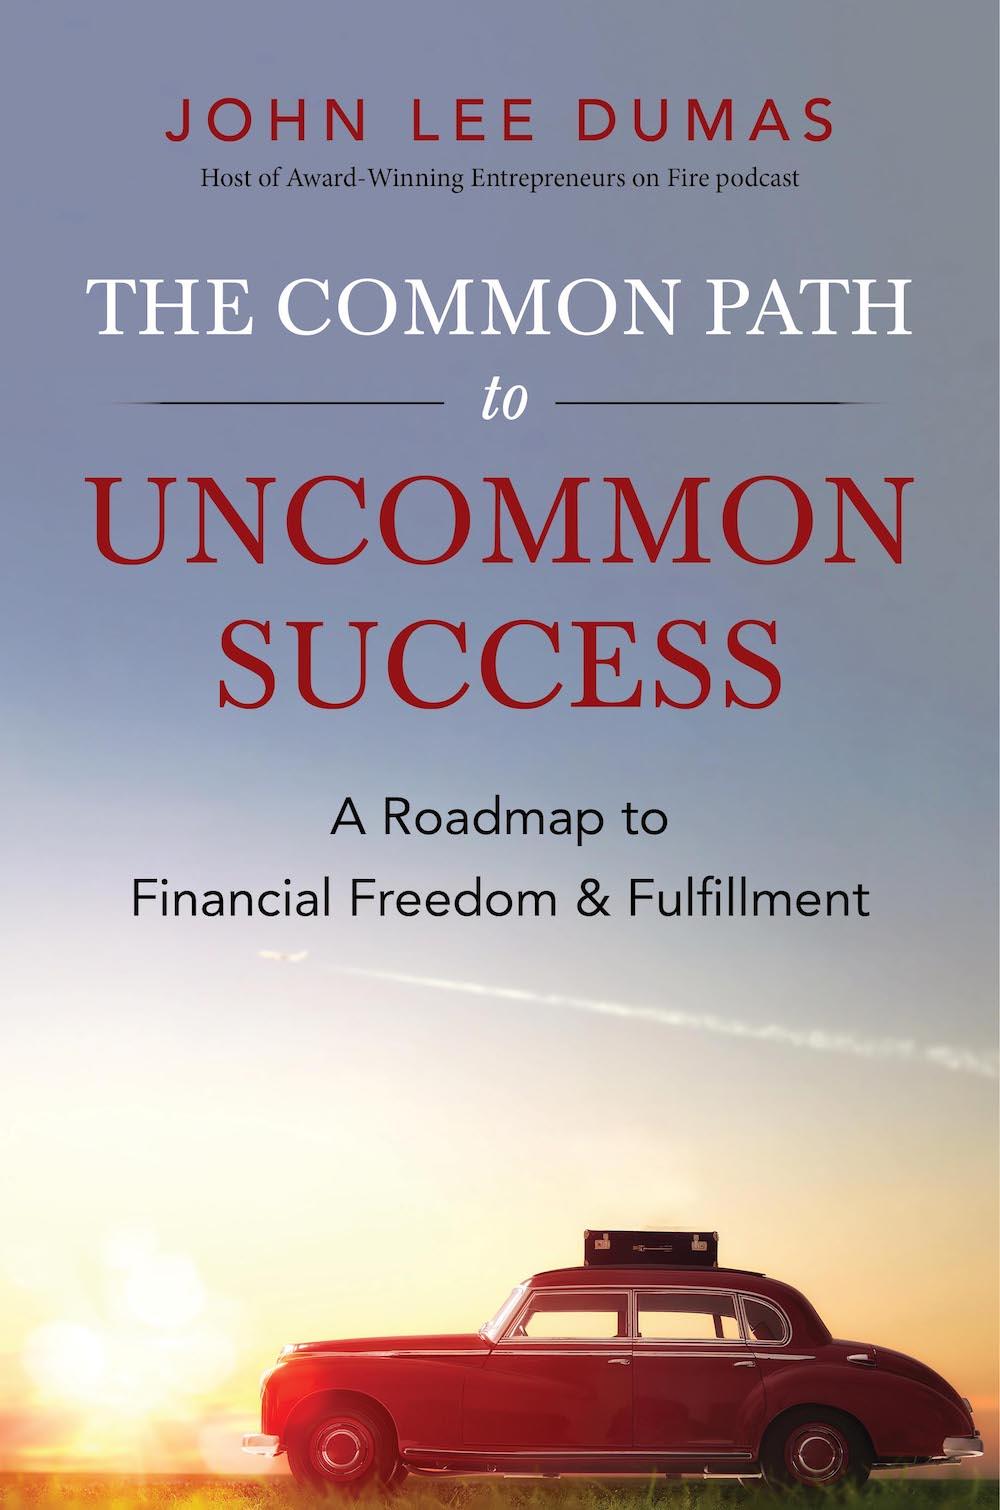 The Common Path Book Cover - winner 1